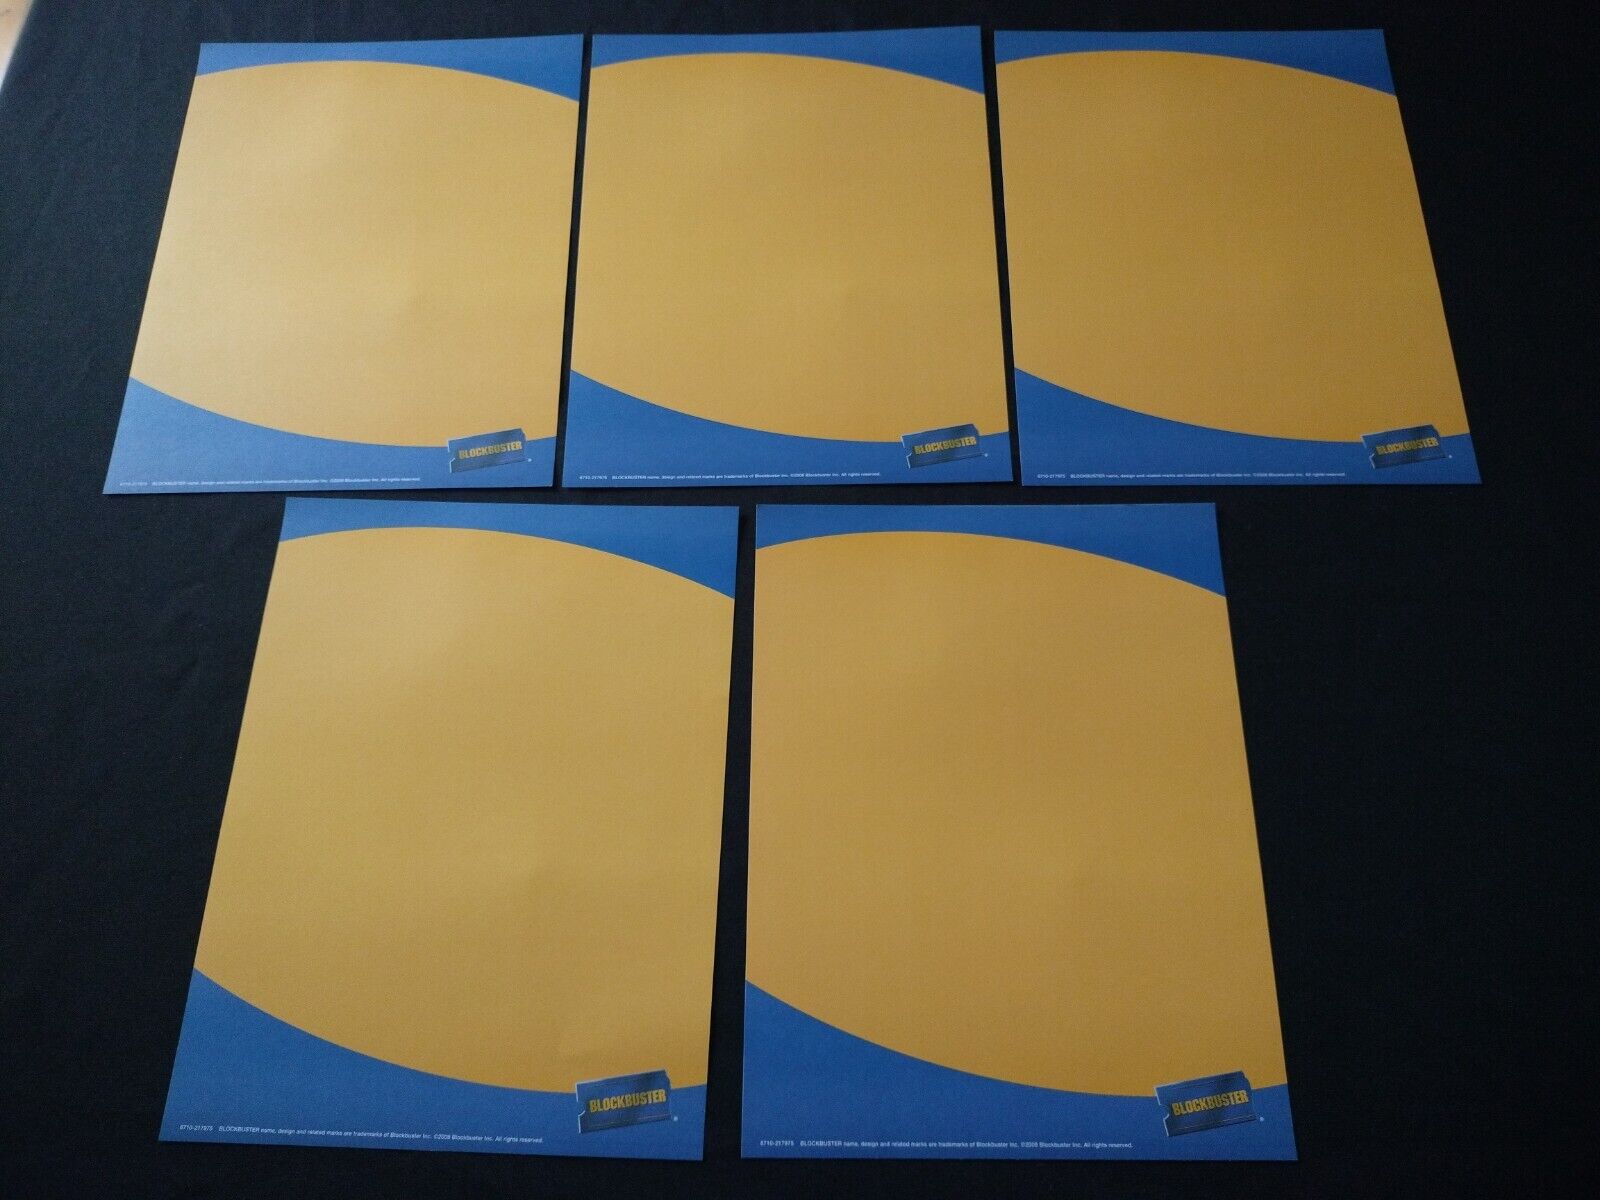 RARE Blockbuster 2008 video store SET of 5 blank signs 8 1/2 x 11 MINT part# 